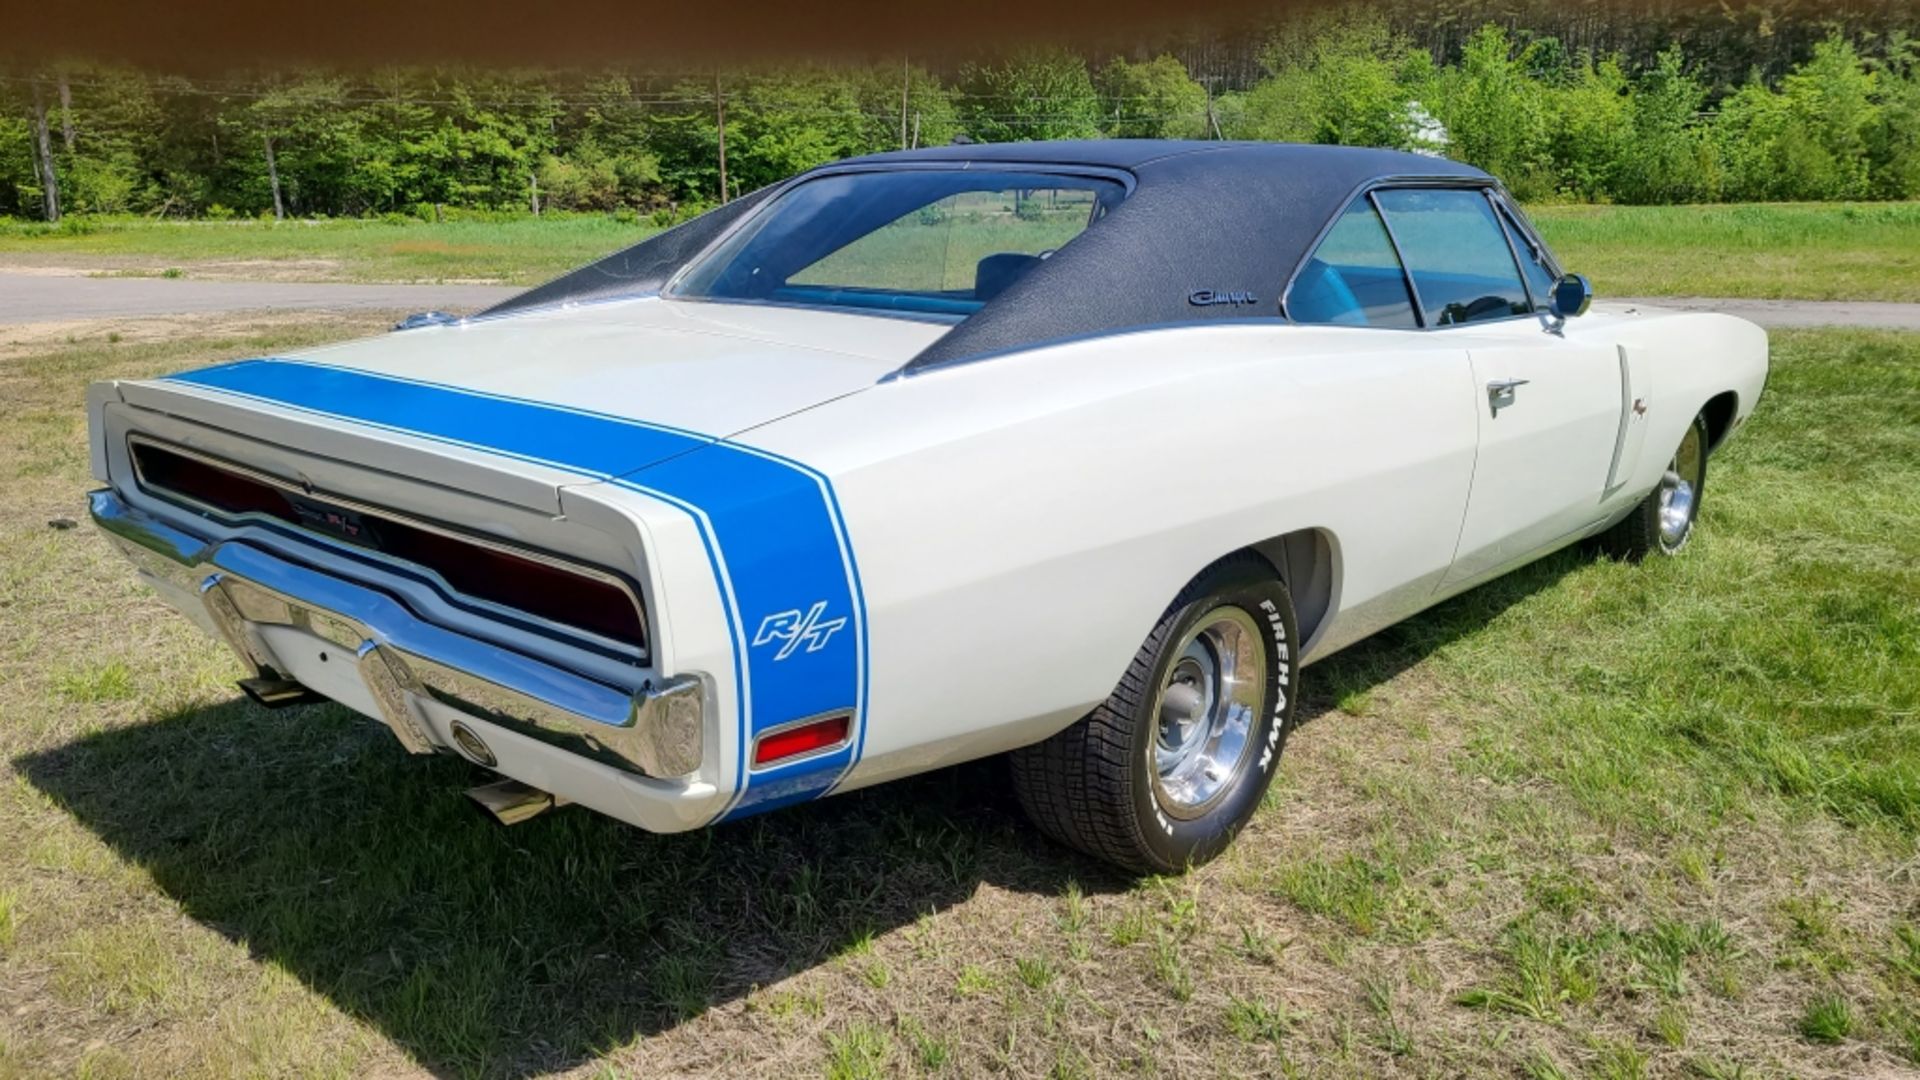 1970 Dodge Charger Rt - Image 8 of 24